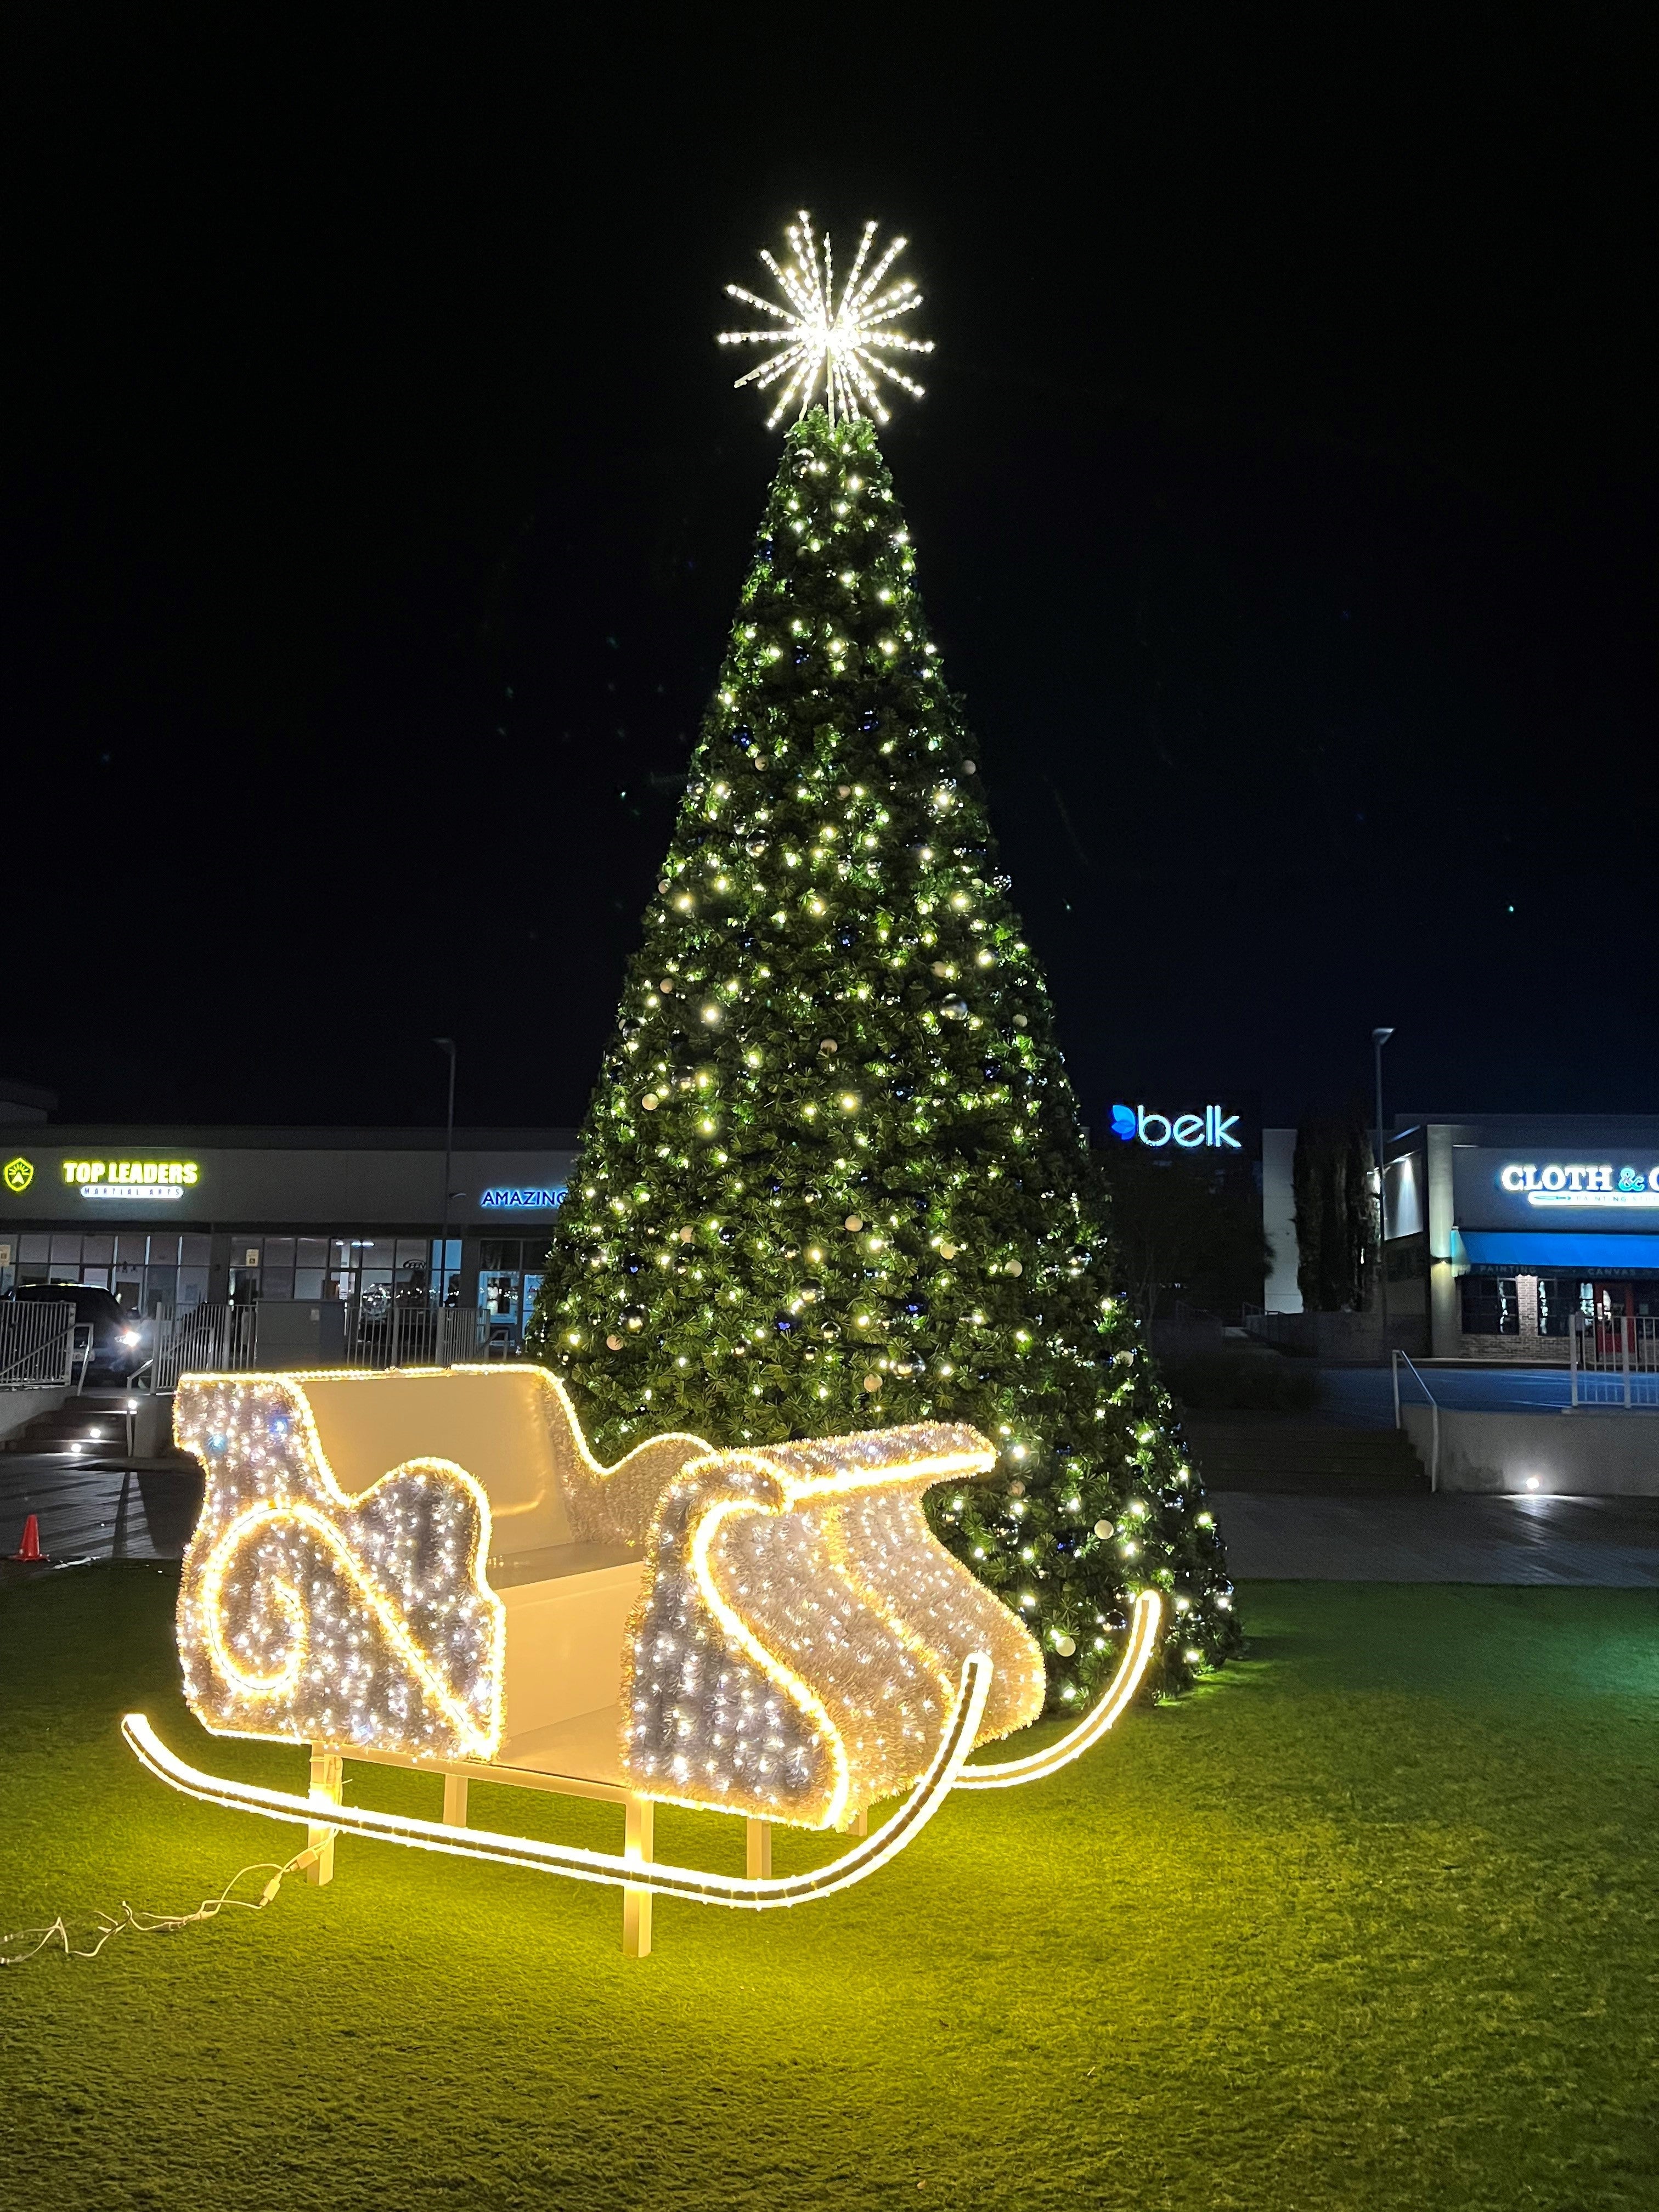 Glade Parks Shopping Center in Texas features an oversized commercial Christmas Tree with a LED Santa Sleigh in front